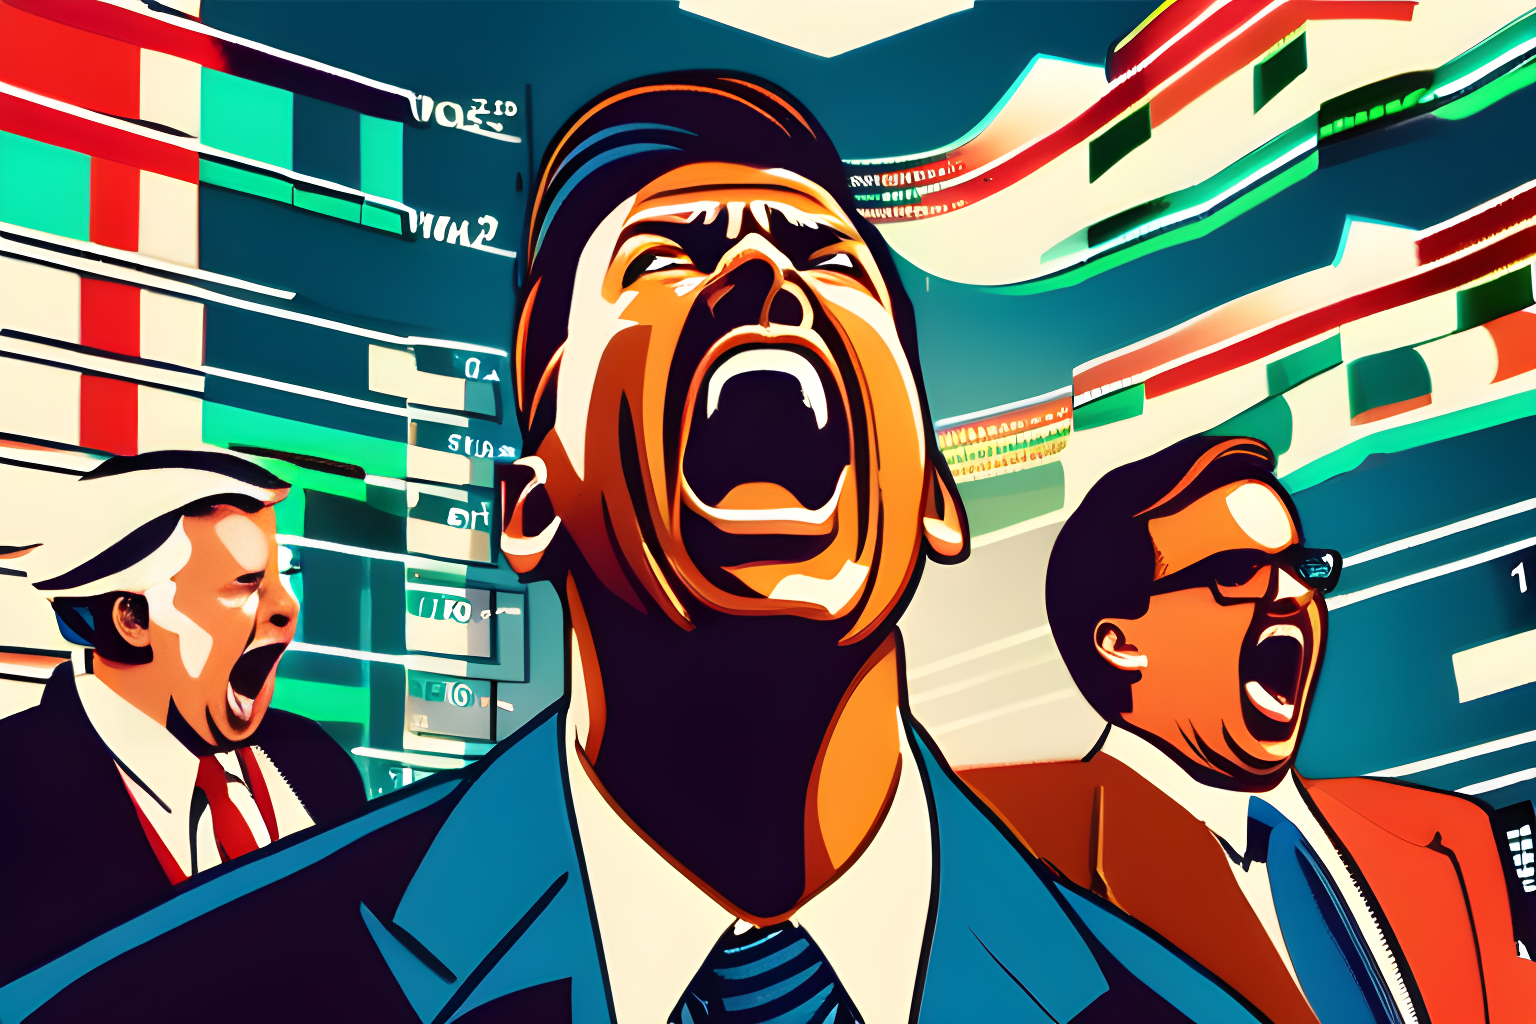 stock traders shouting in agony